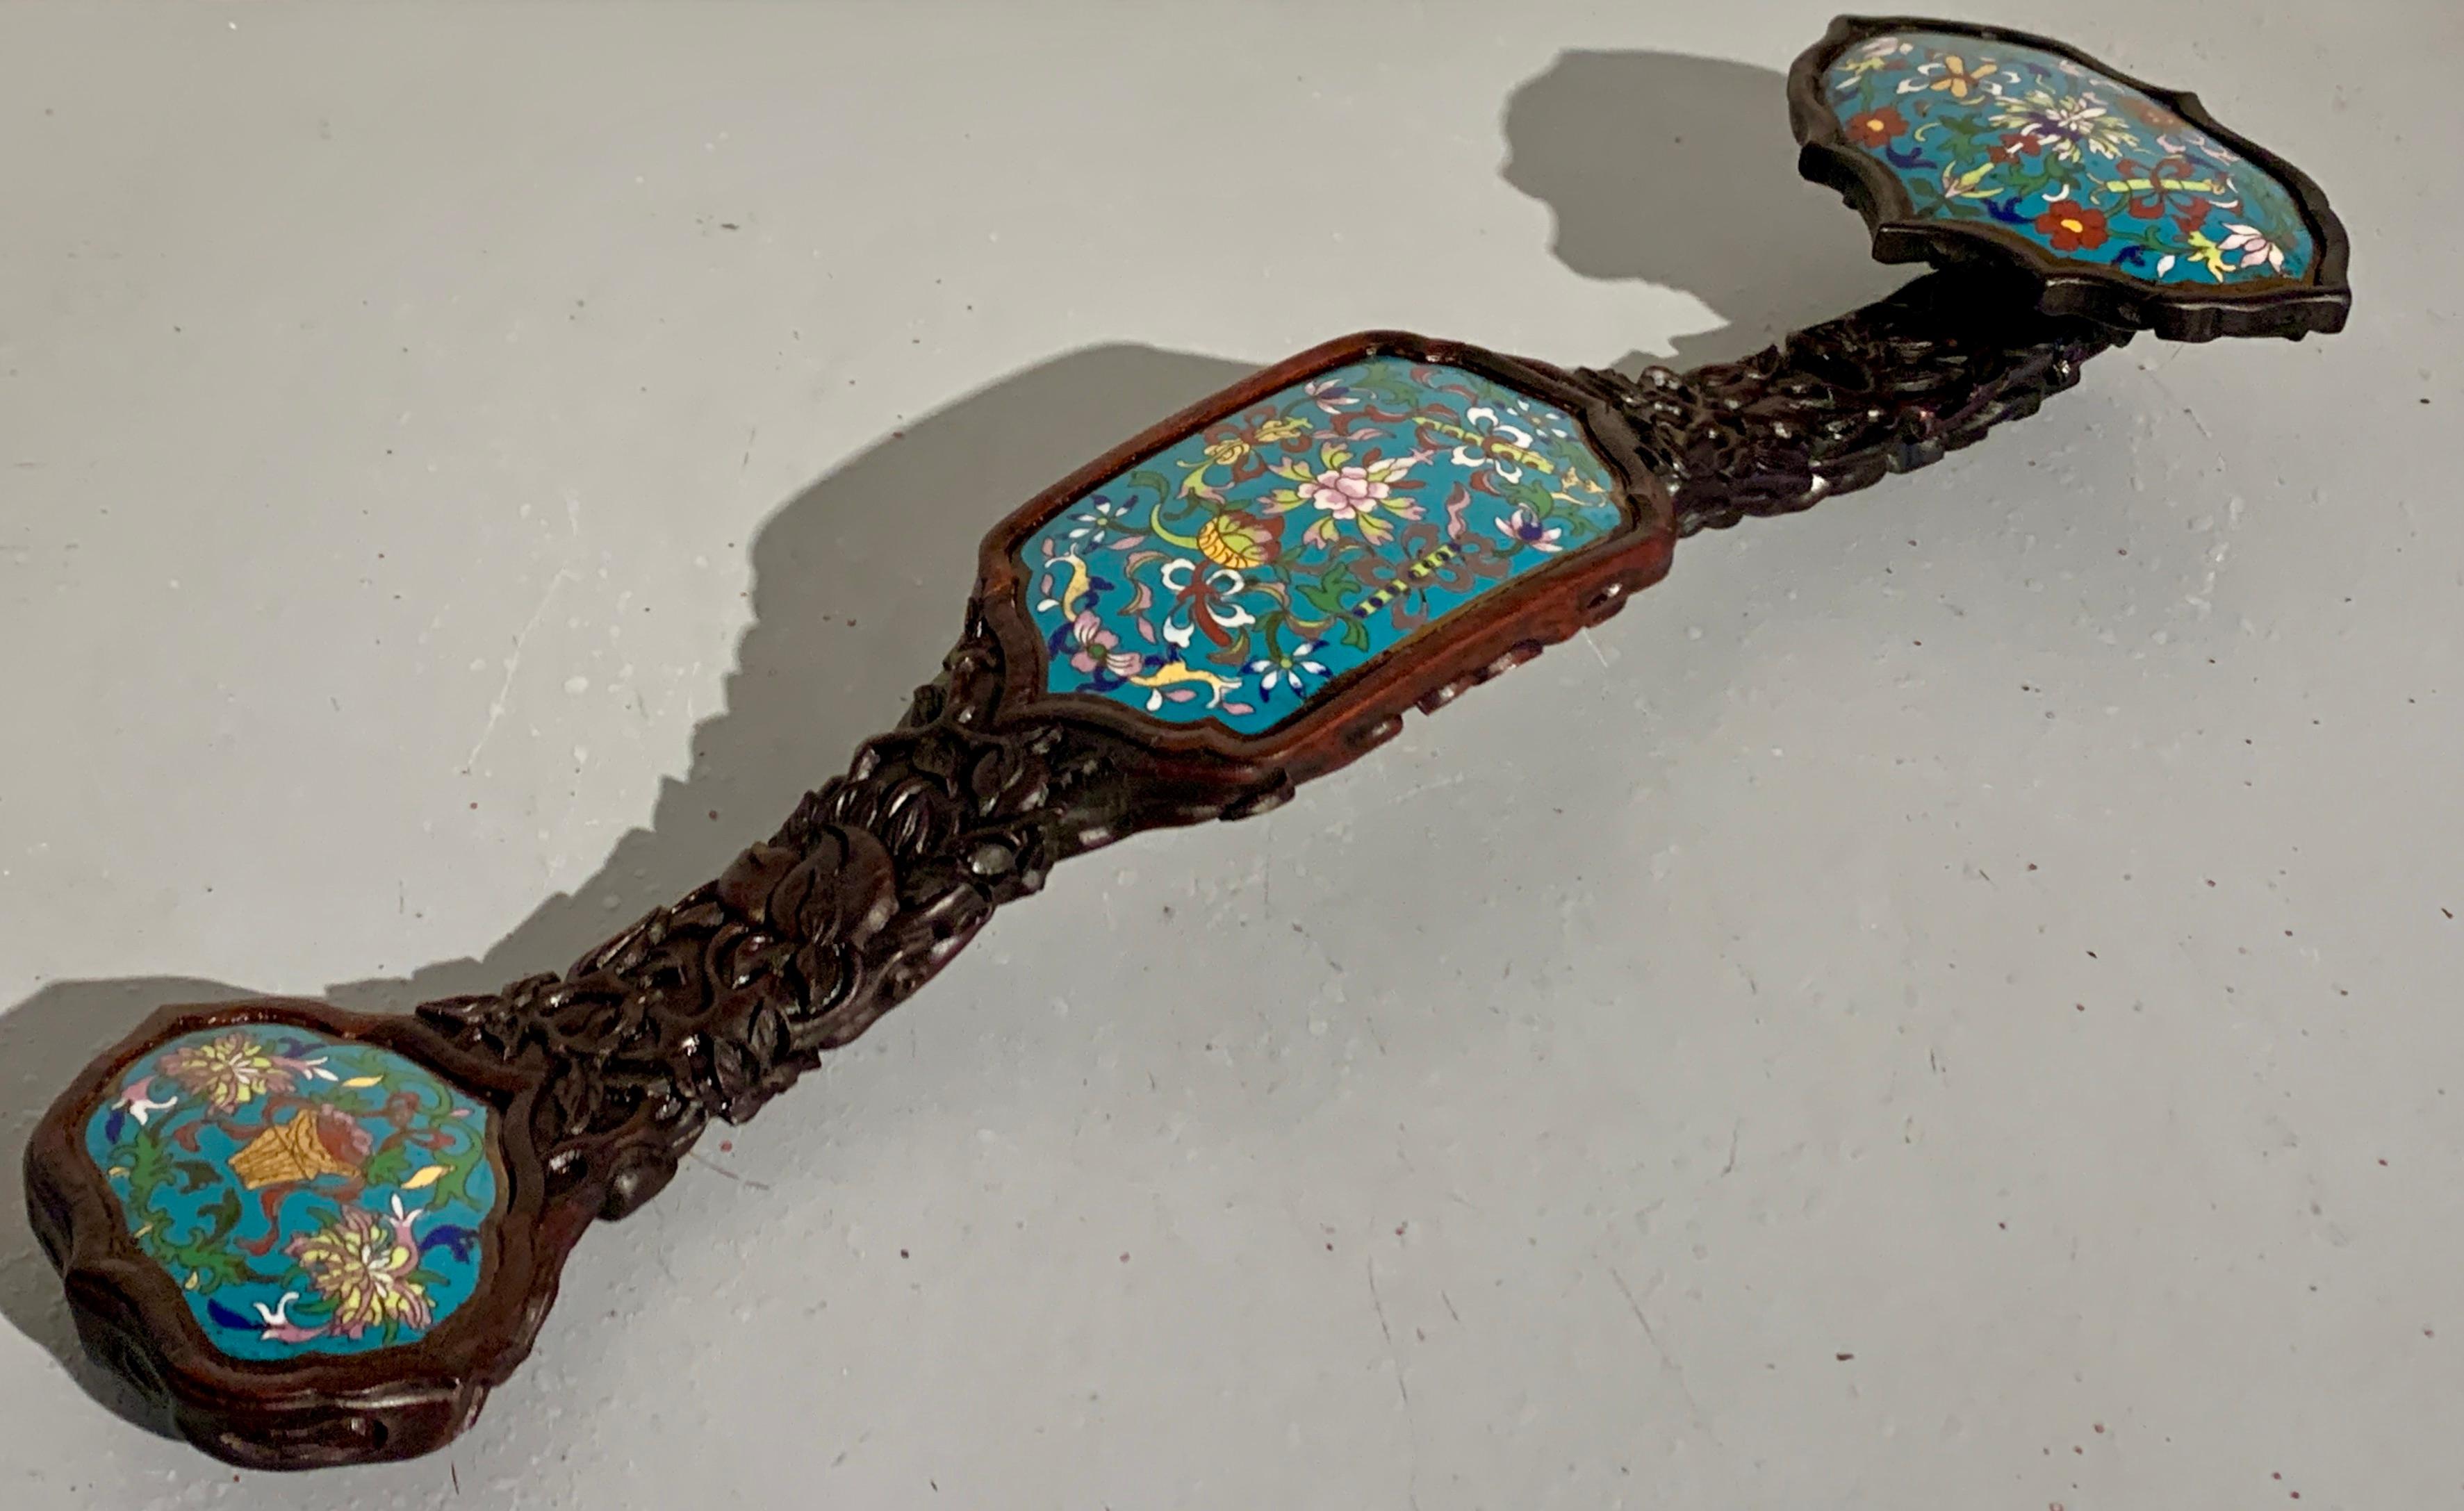 A large and impactful Chinese ruyi scepter of carved hardwood with inset cloisonne panels, Republic Period, circa 1920, China.

The large hardwood ruyi scepter of typical 